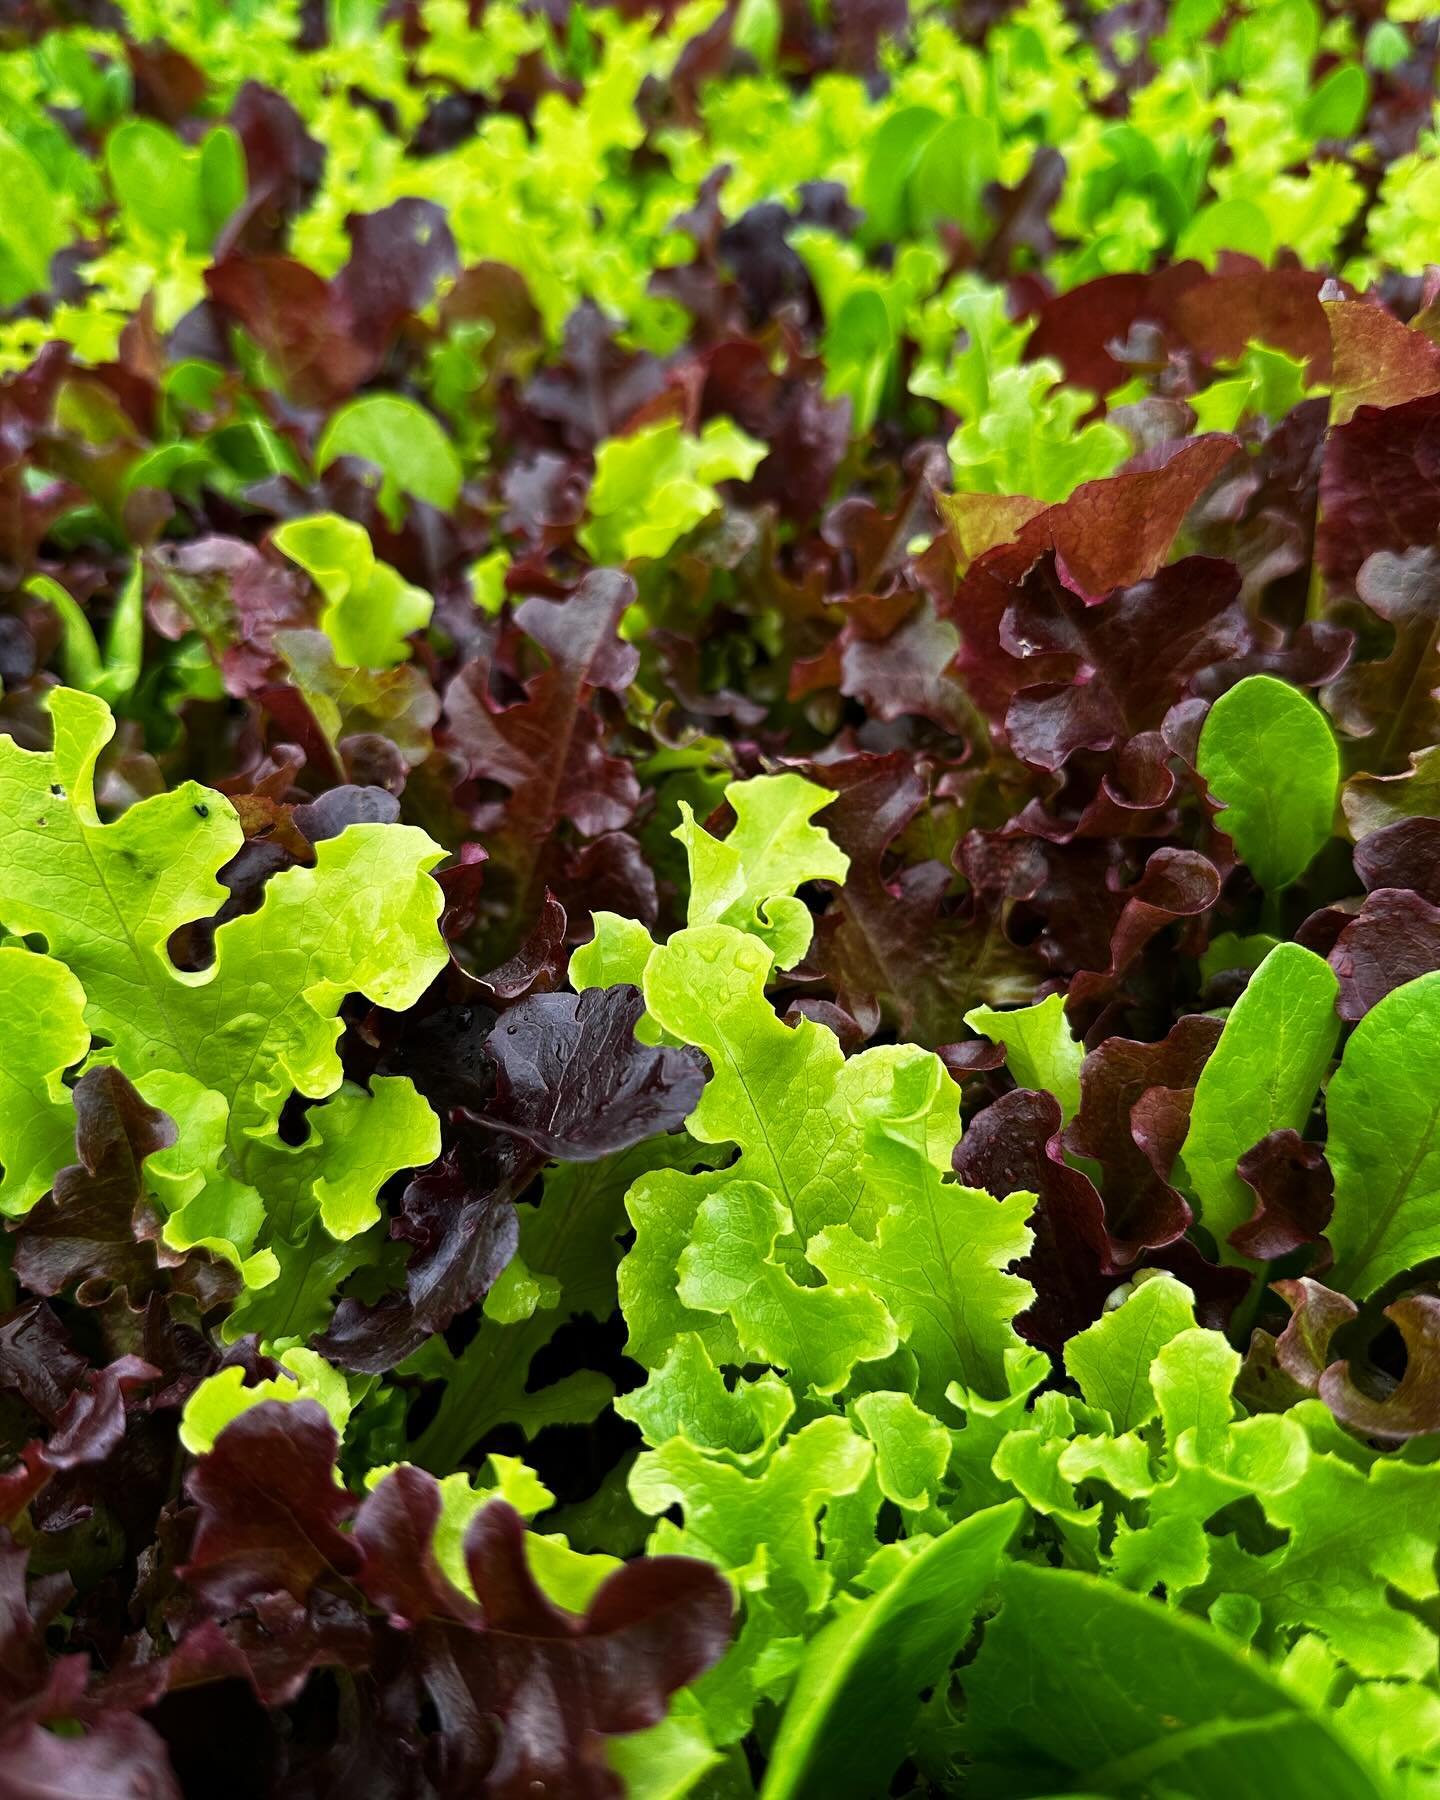 Our spring-planted #lettuce is coming in nice and early! We&rsquo;re planting in successions so we always have a steady supply to harvest and donate. The shade cloth helps to prolong harvest windows of each succession since it slows down the process 